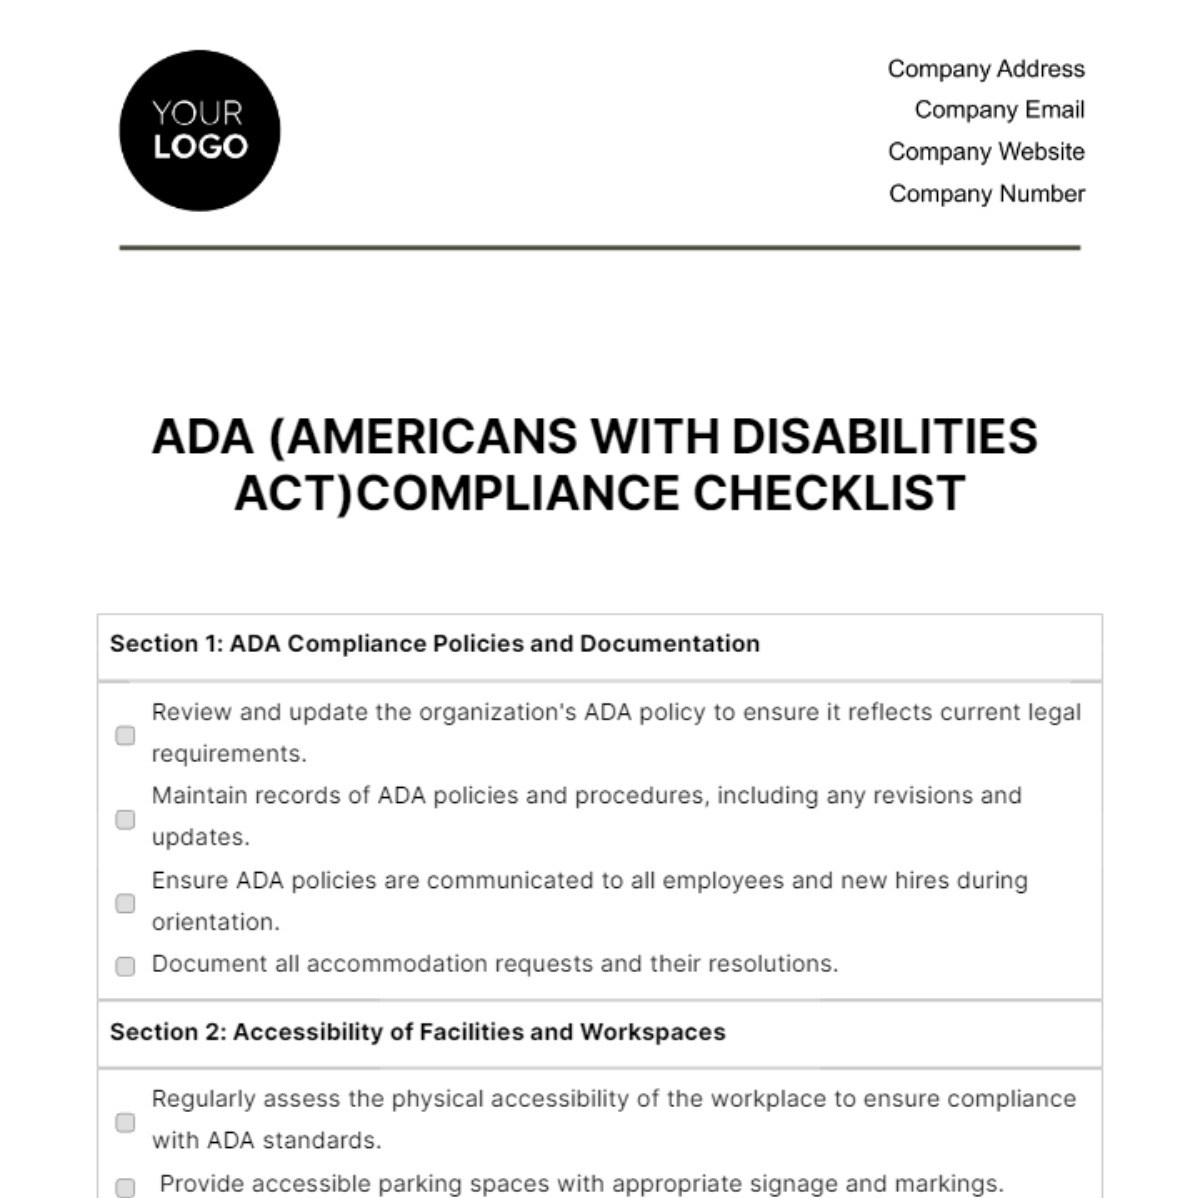 ADA (Americans with Disabilities Act) Compliance Checklist HR Template